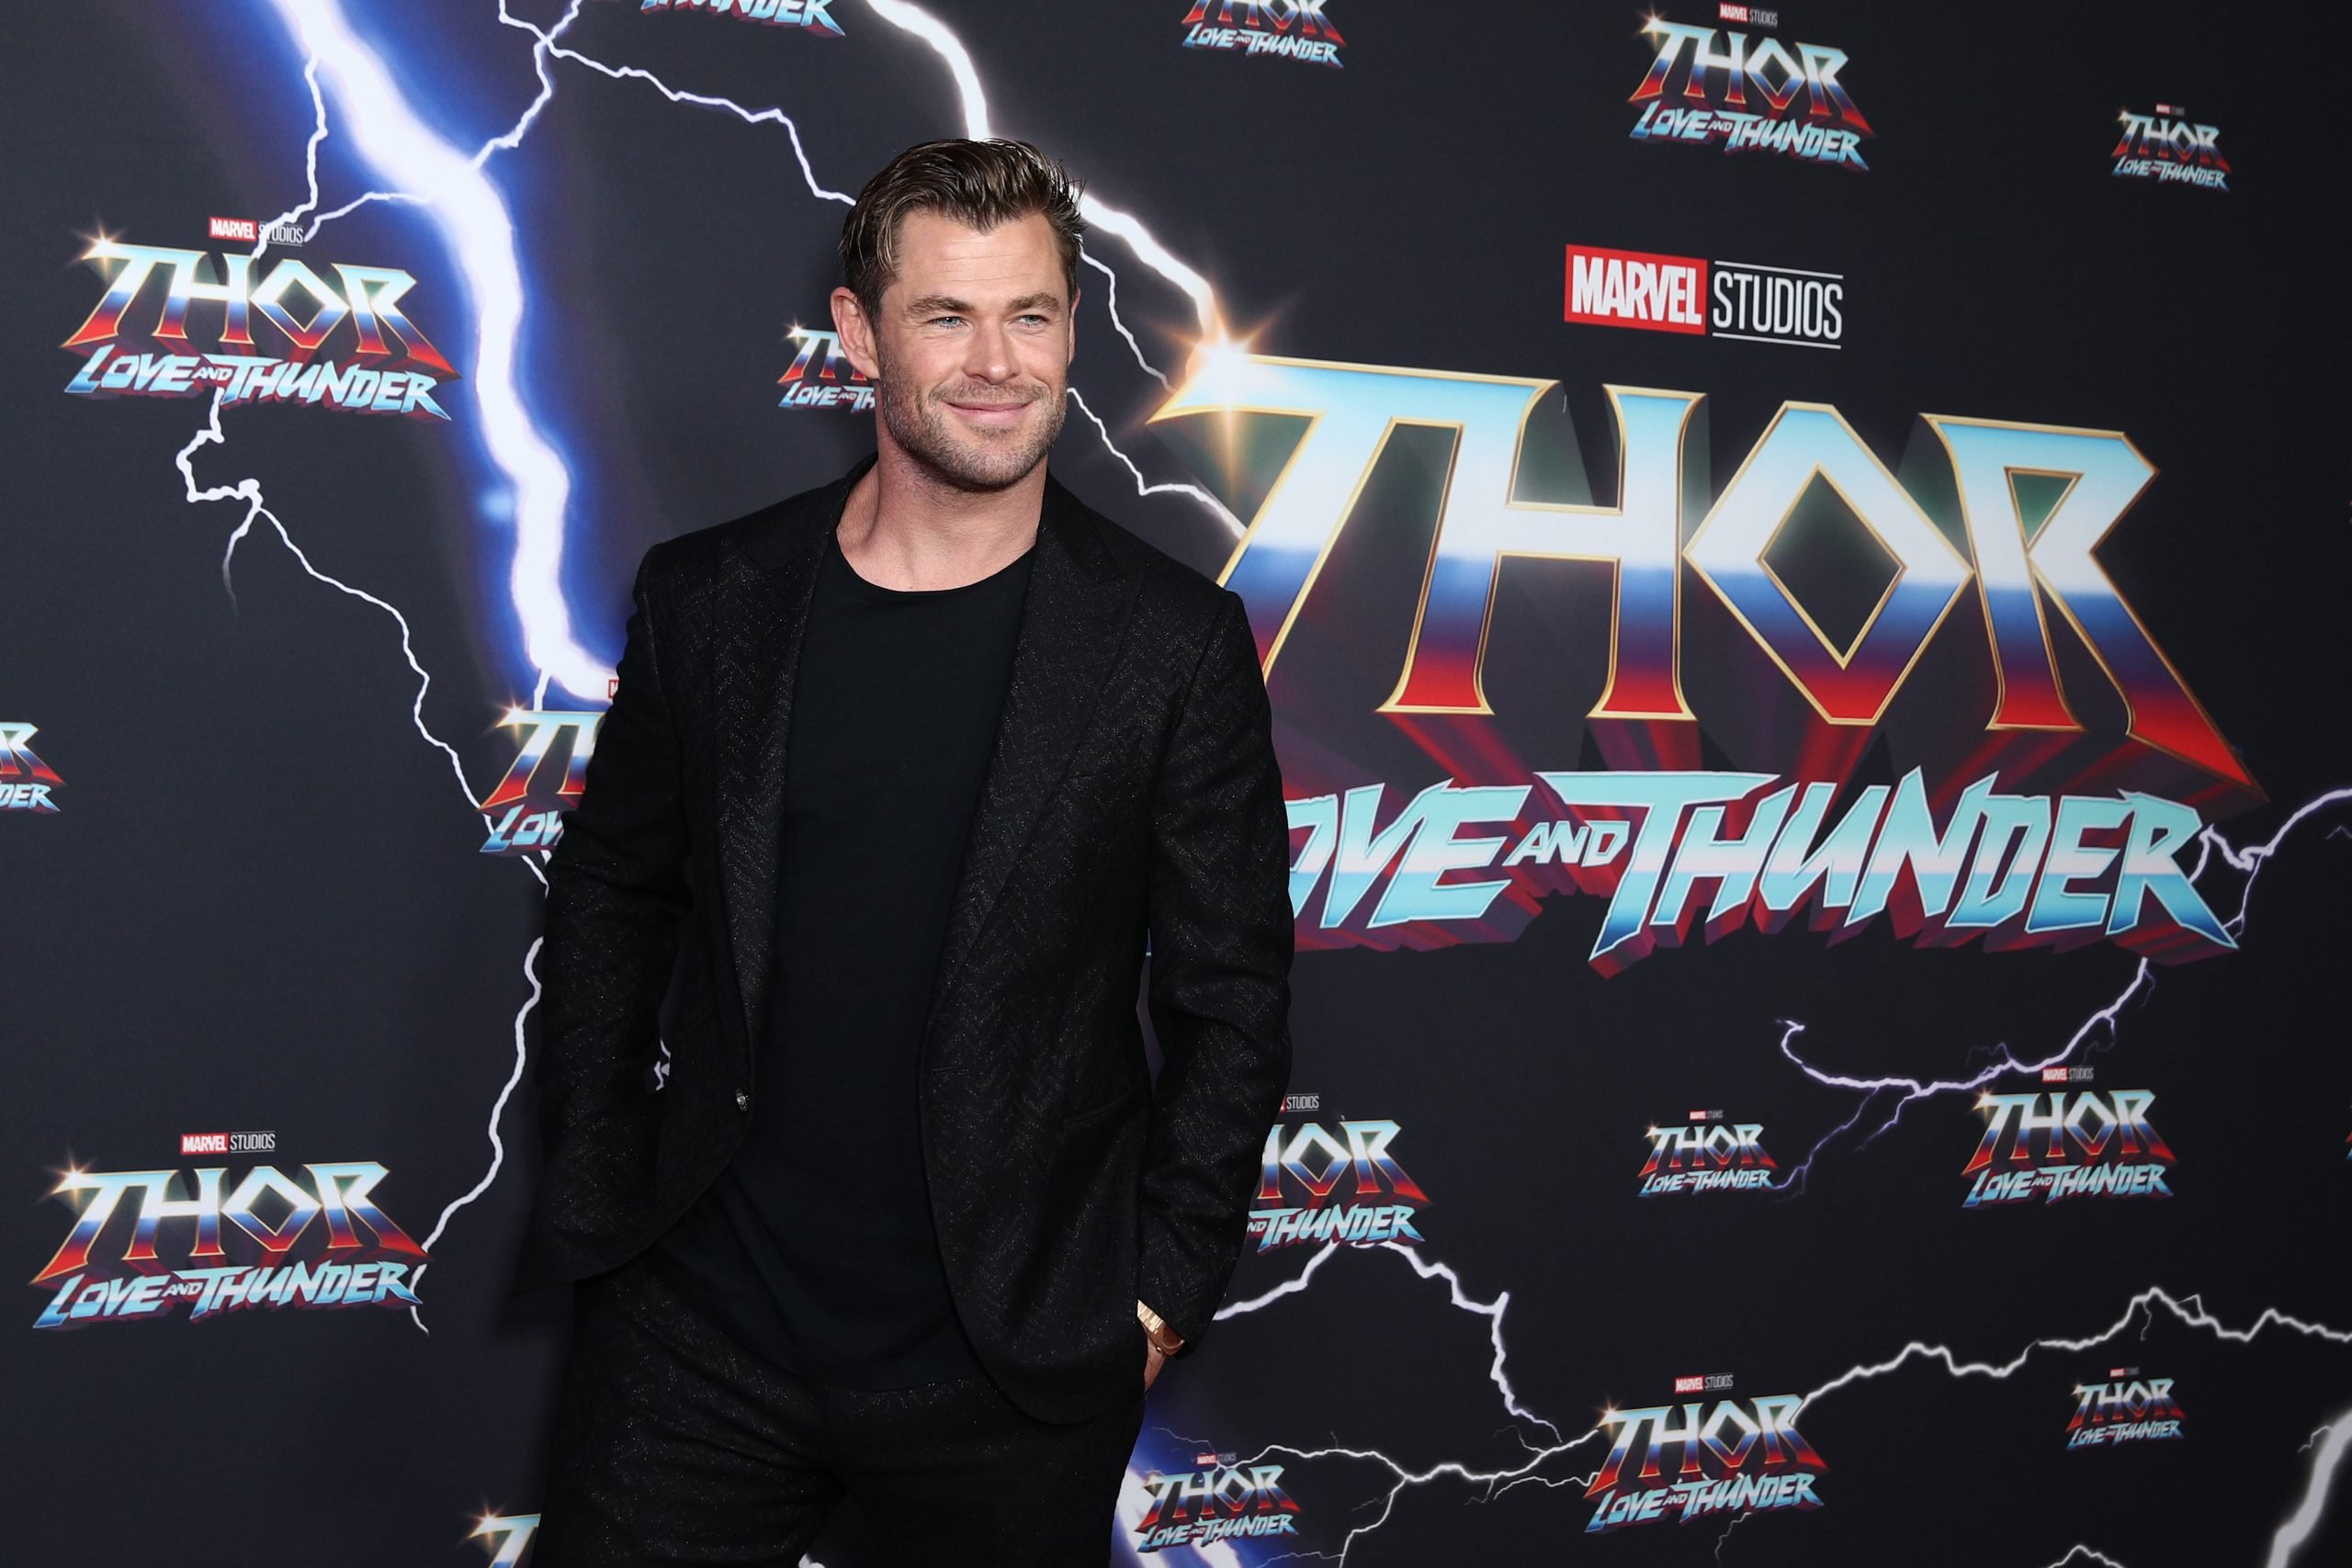 Chris Hemsworth, who owns a $30 million mansion, smiles on the carpet at the Sydney premiere of 'Thor Love and Thunder'